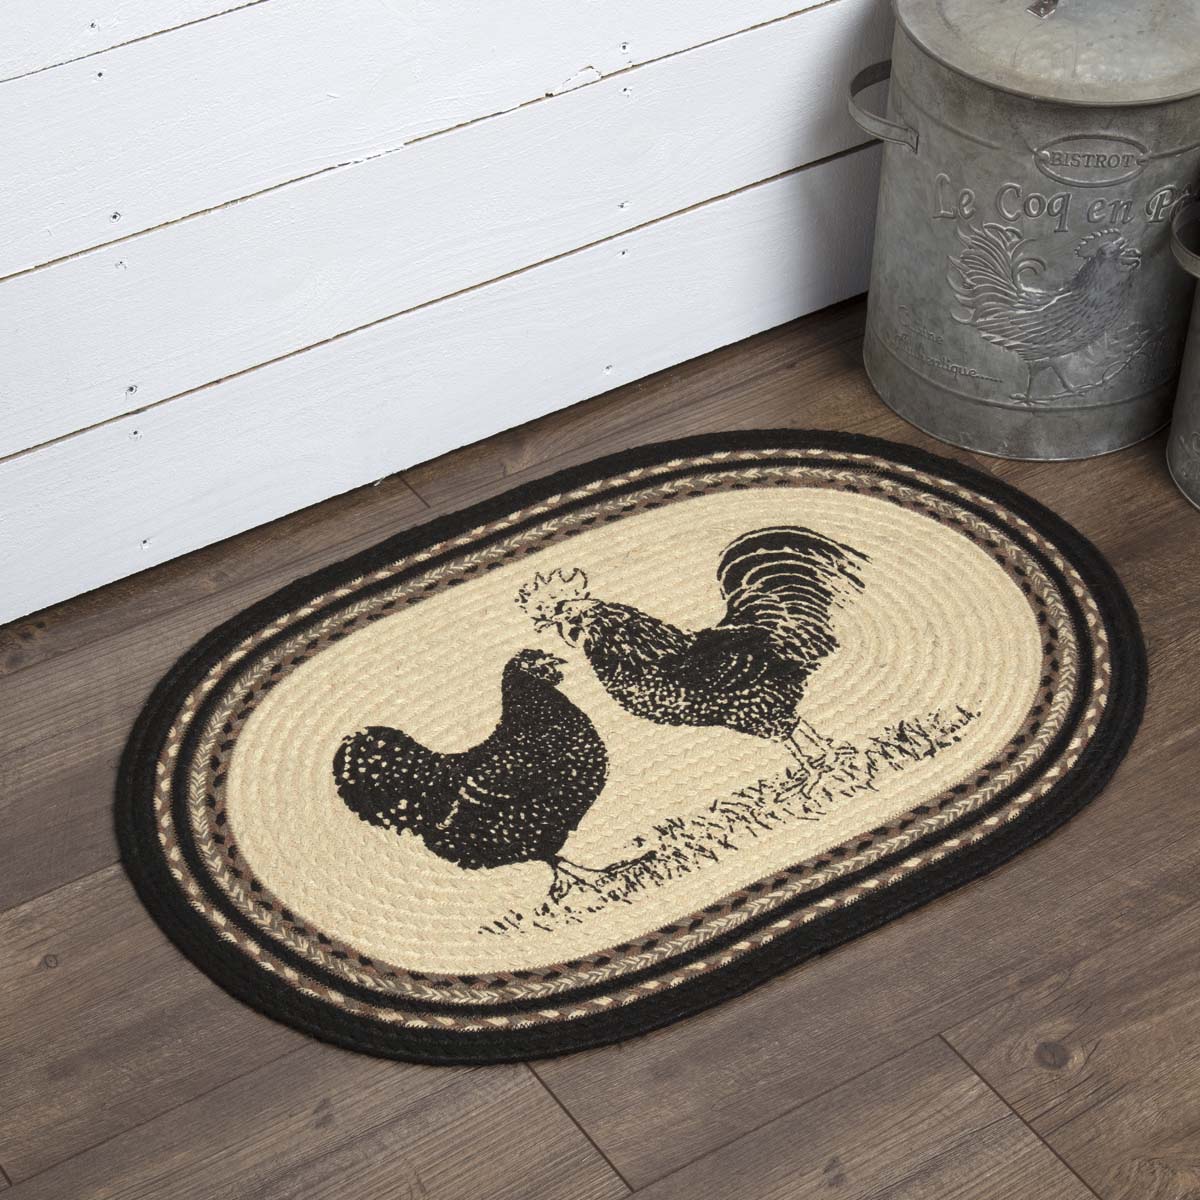 69391-Sawyer-Mill-Charcoal-Poultry-Jute-Rug-Oval-w-Pad-20x30-image-2